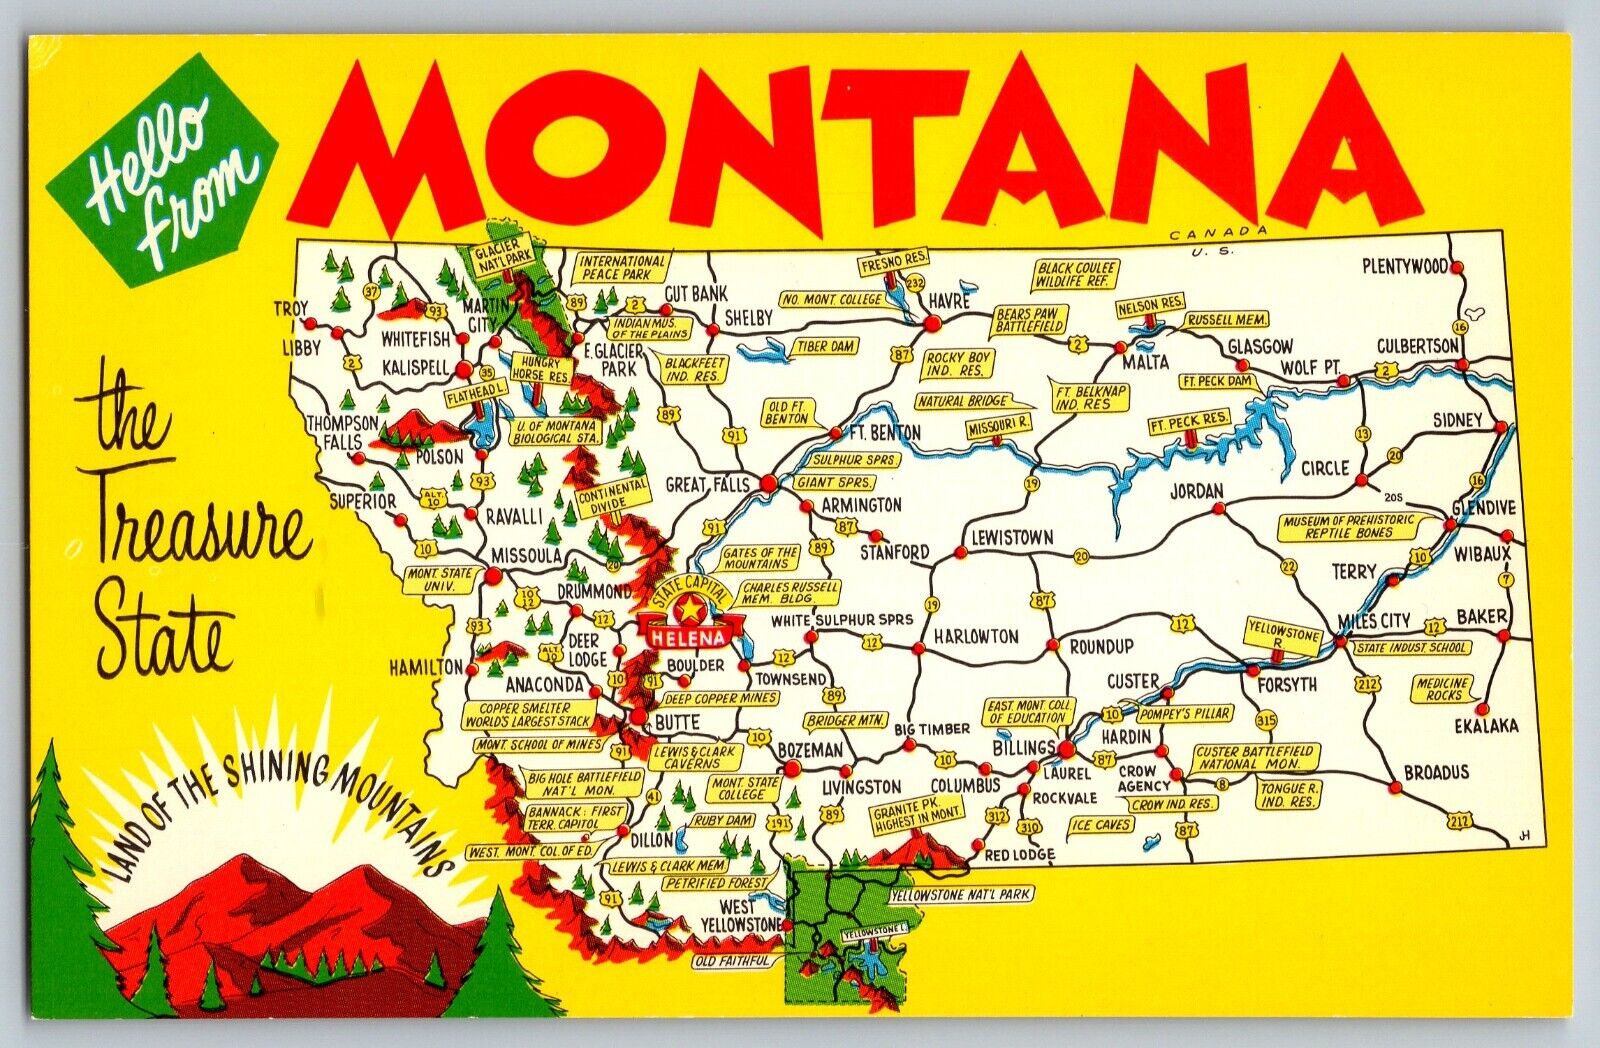 Montana MT - Hello From the Treasure State - Vintage Postcard - Unposted